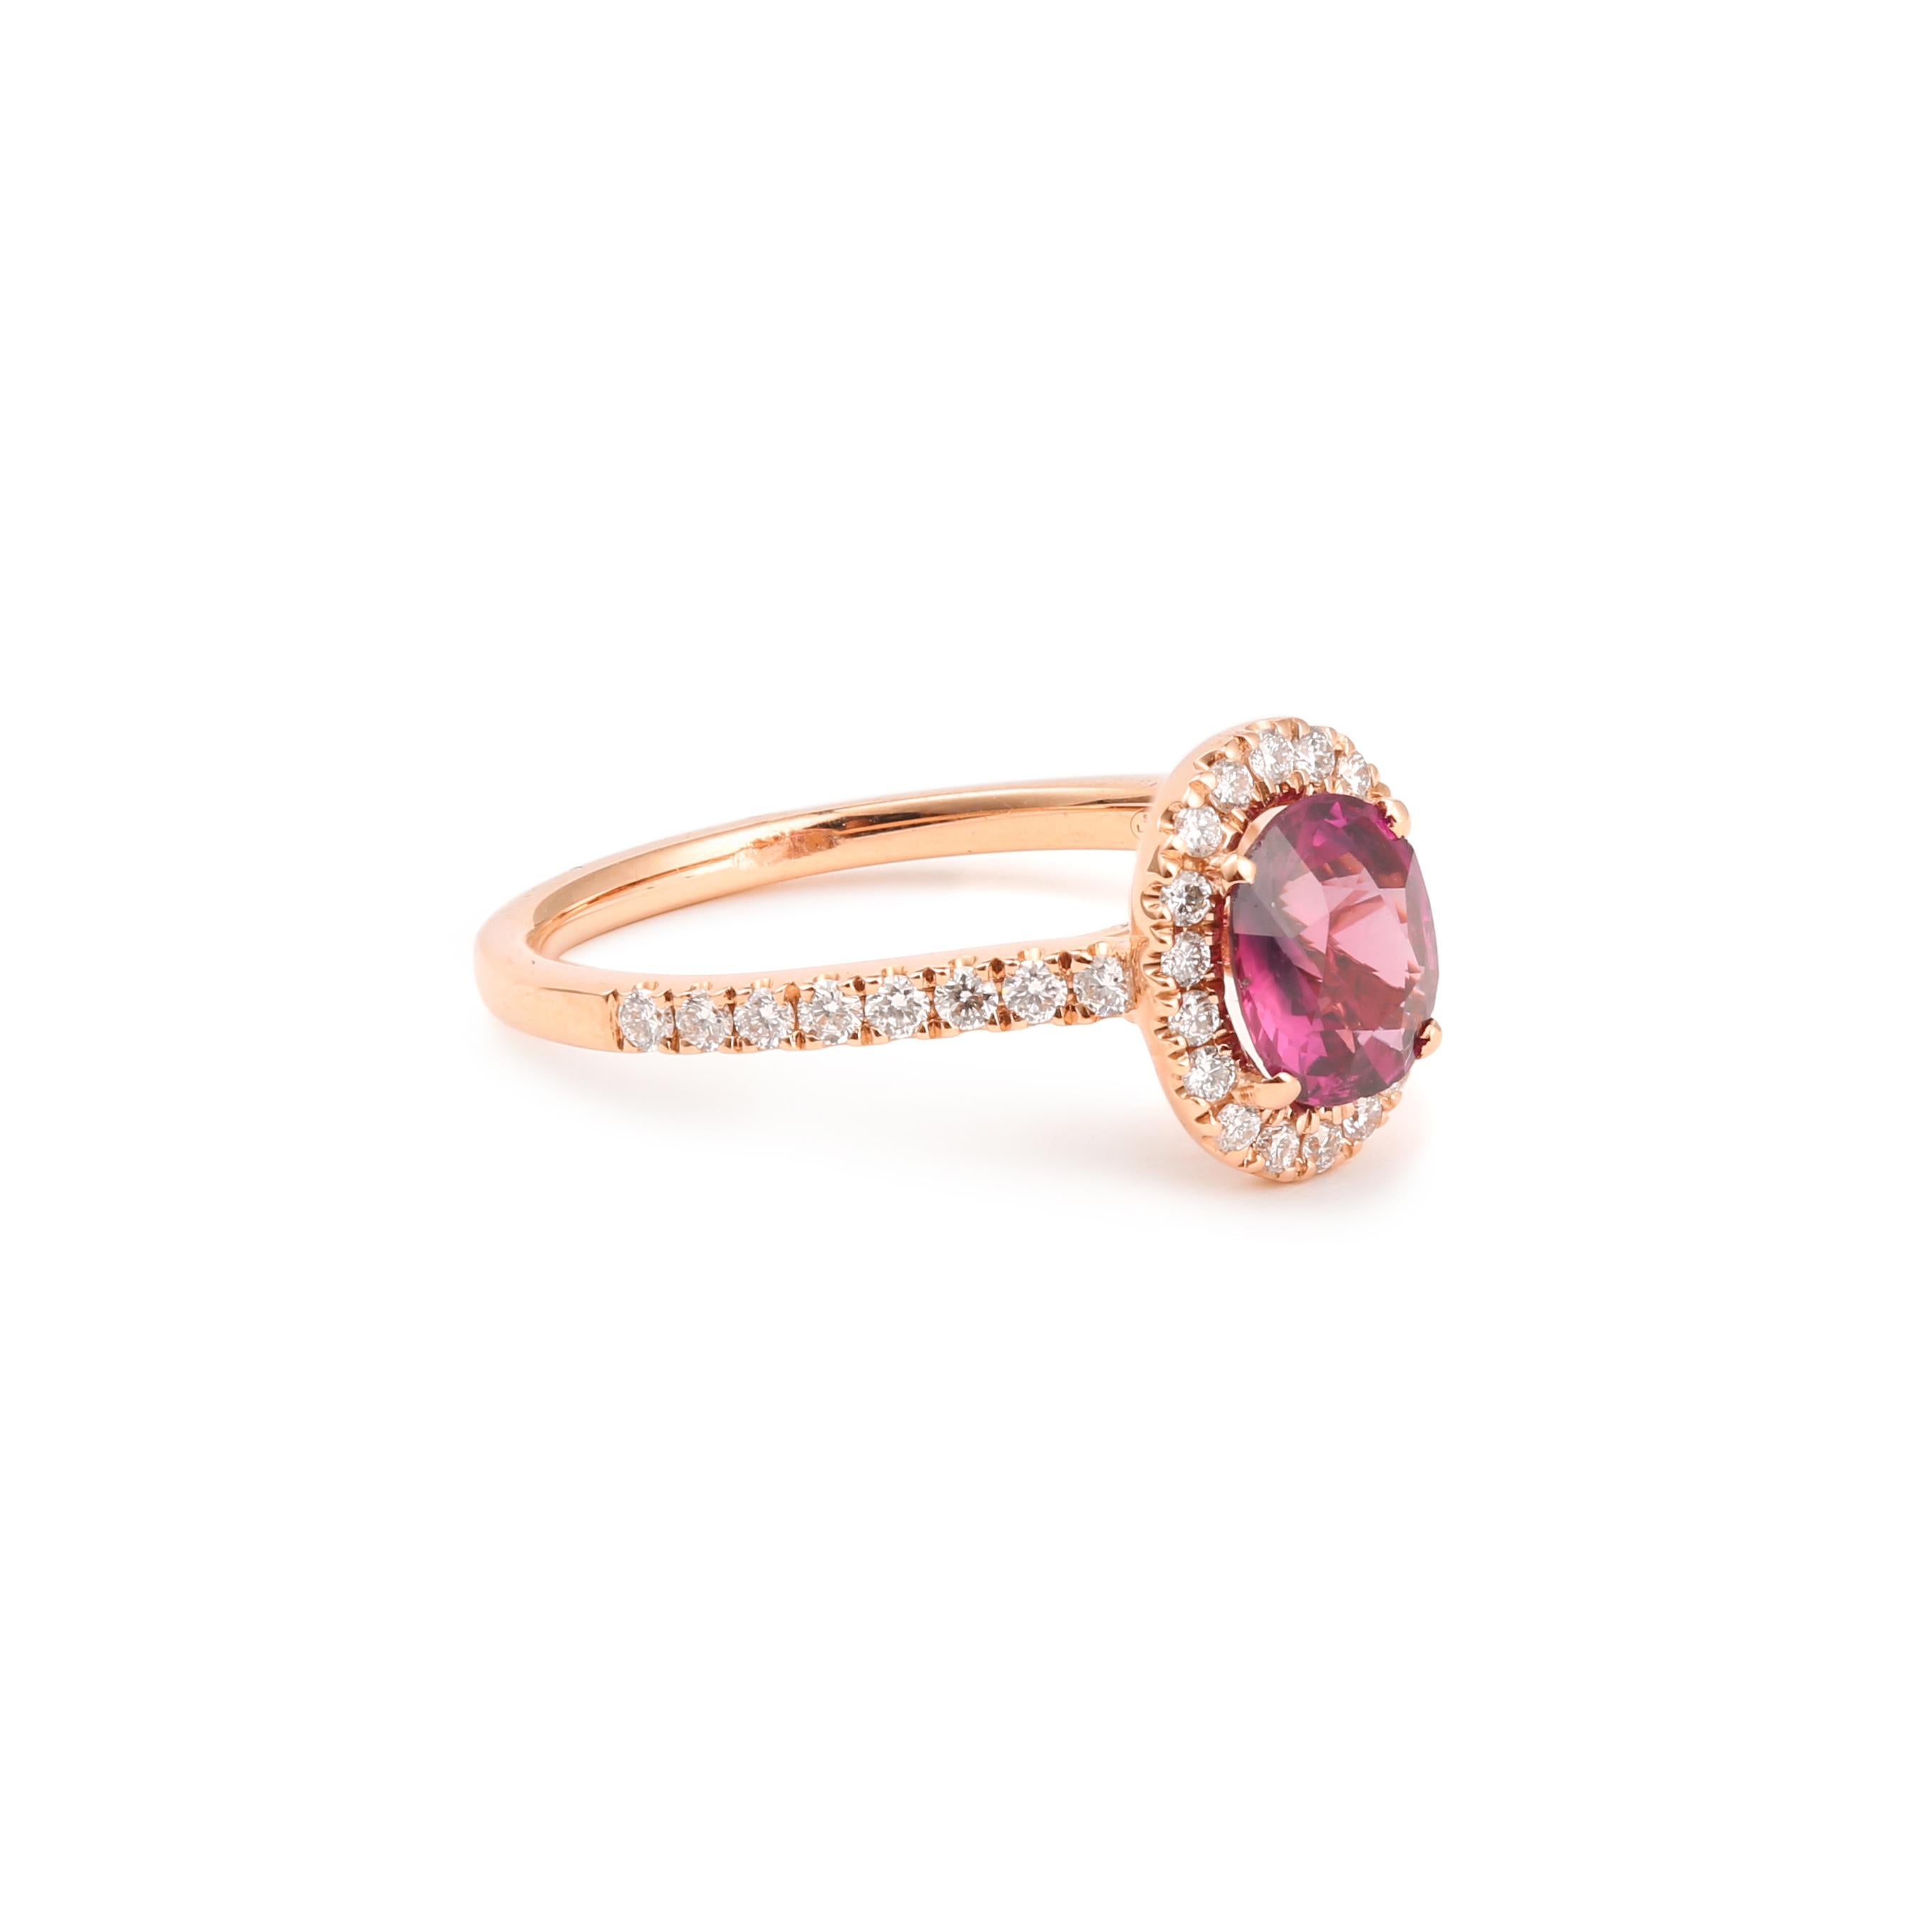 Lovely pompadour ring in rose gold set with an oval pink sapphire and a pavement of brilliant cut diamonds.

Pink sapphire weight : 1.25 carats

Total estimated weight of diamonds : 0.40 carats

Dimensions : 10.62 x 8.58 x 6.83 mm (0.418 x 0.338 x